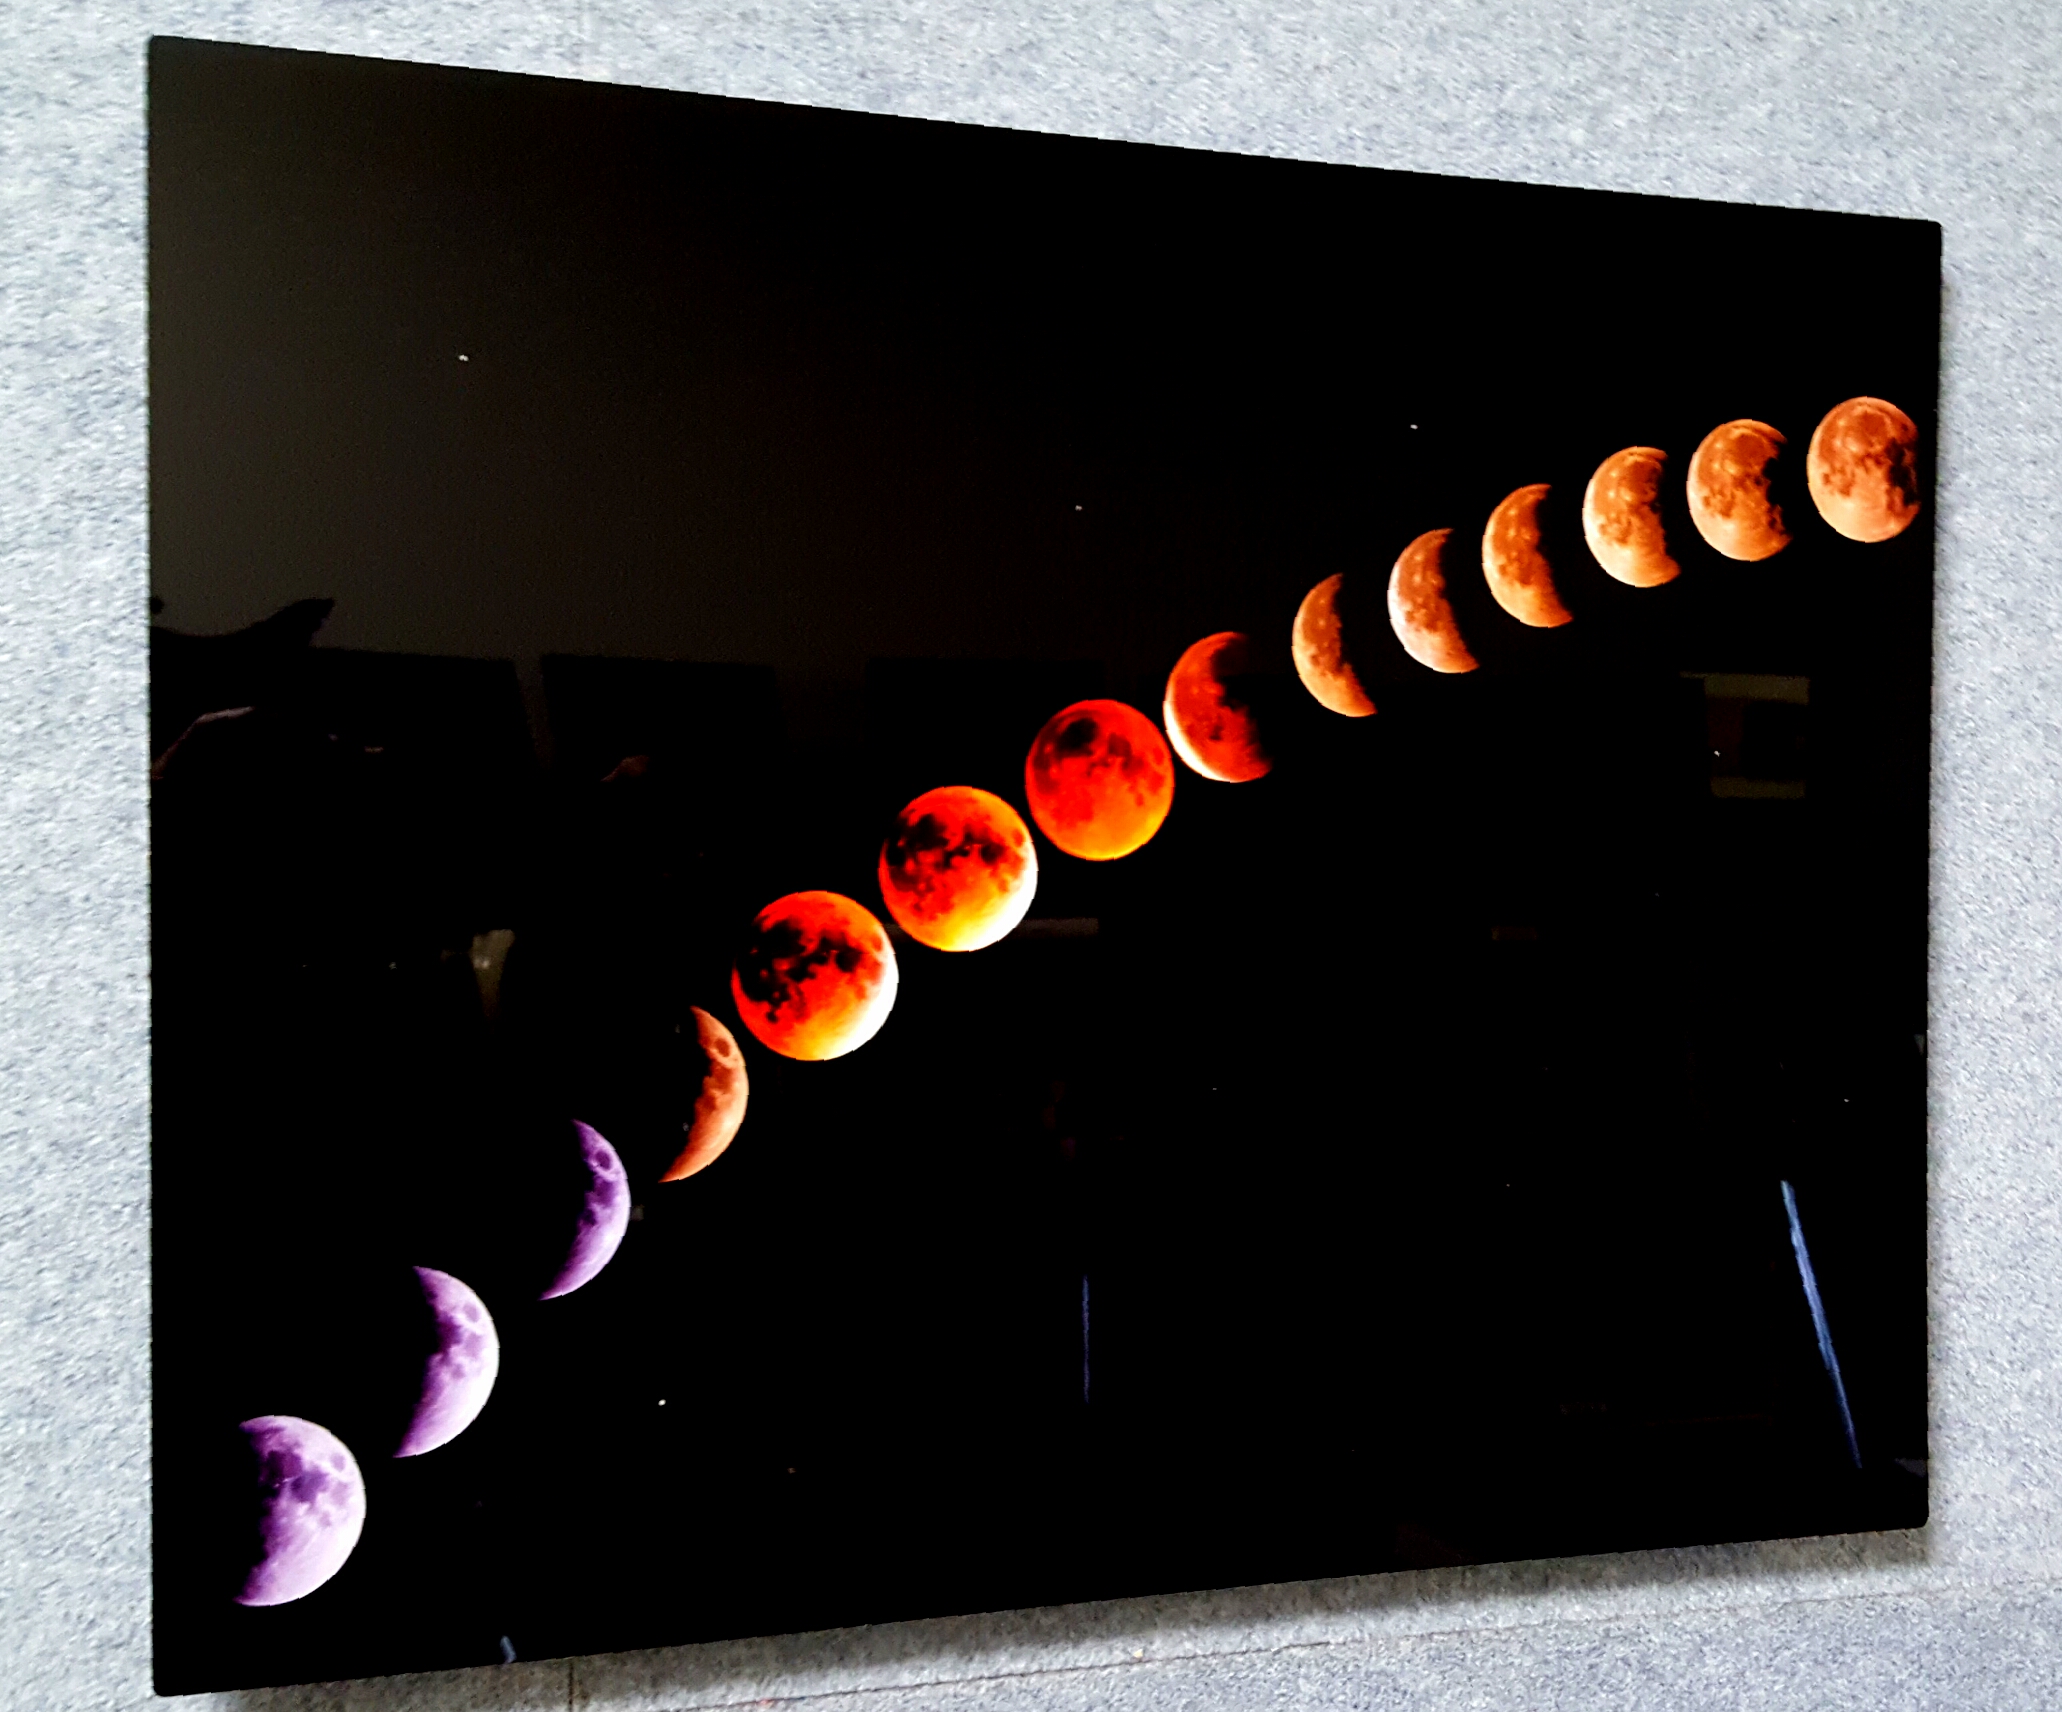 Lunar eclips made with sublimation printing